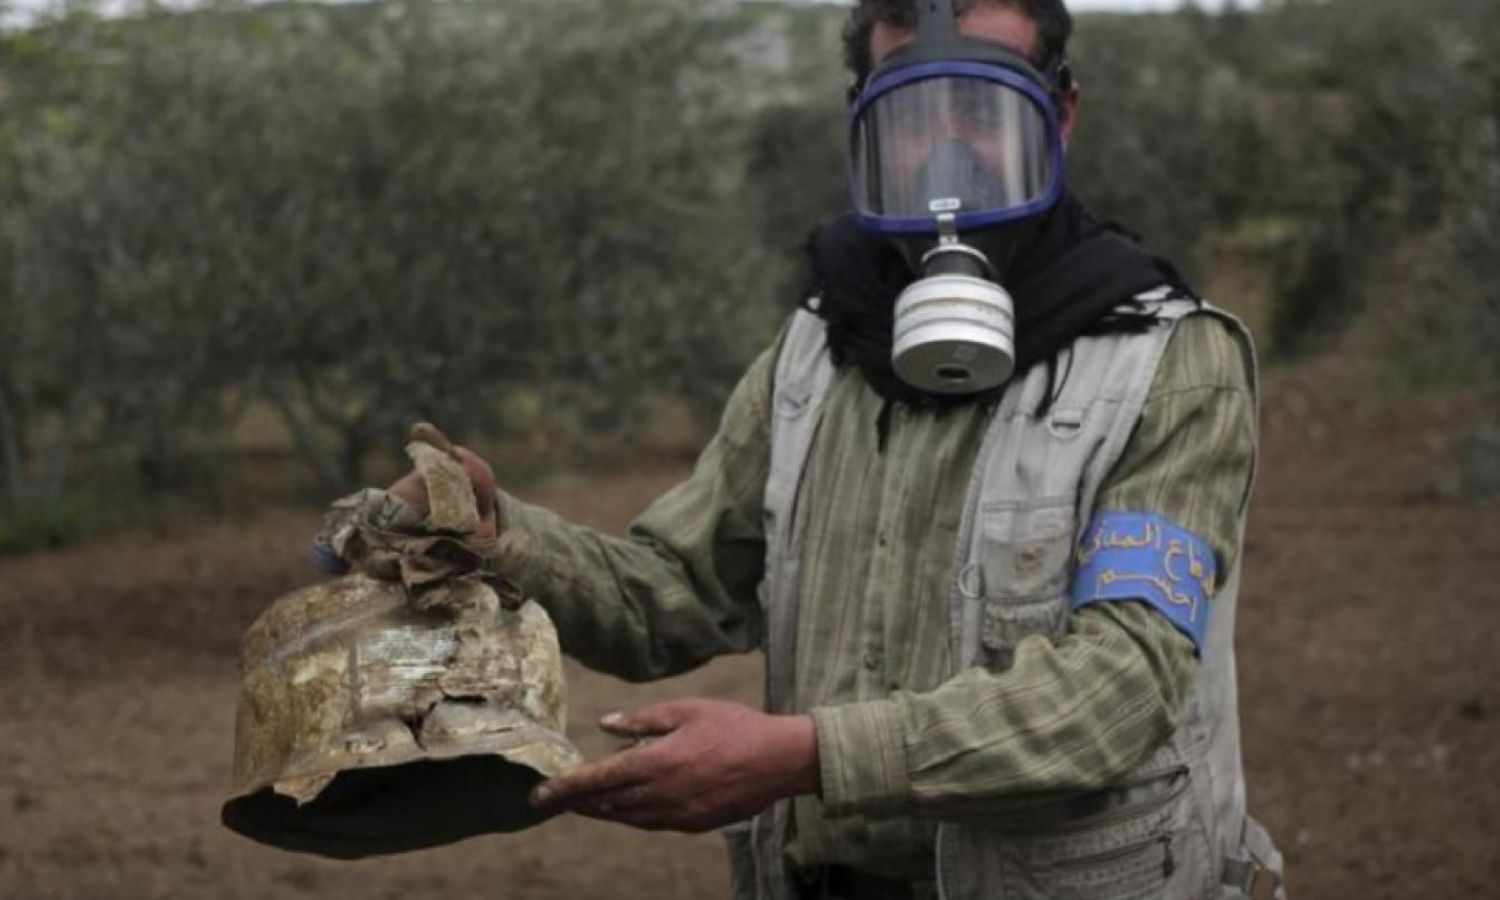 A civil defense member carries a damaged canister in the village of Iblin after an attack targeting the villages of Kansafra, Iblin, and Joseph in the Idlib countryside with chlorine gas, May 3, 2015 (Reuters)